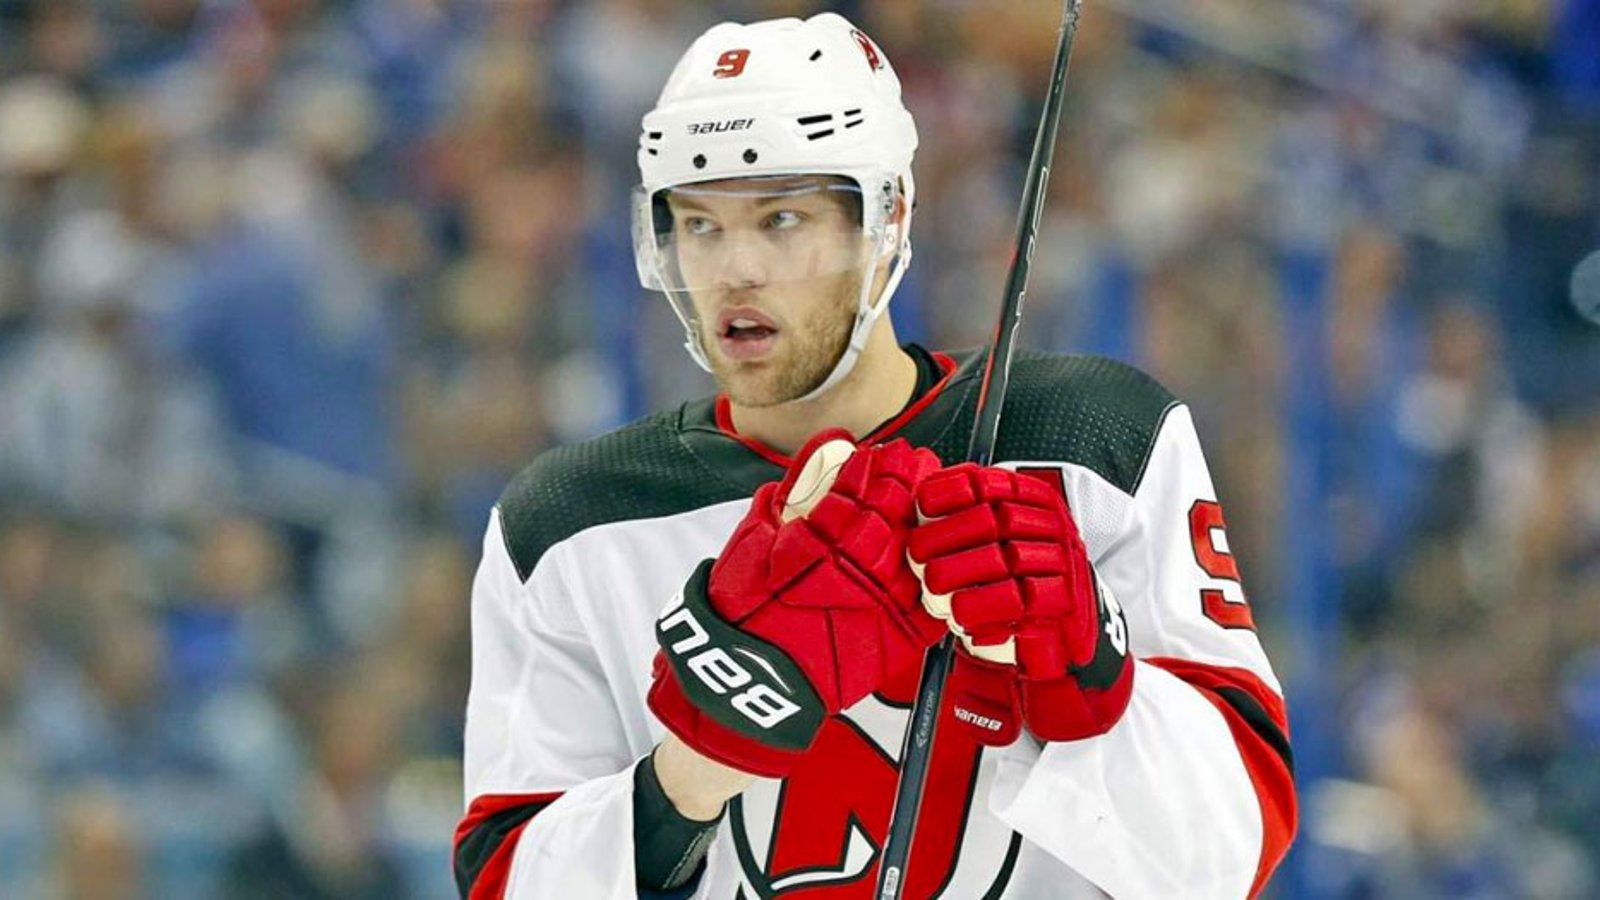 Breaking: Taylor Hall has been traded